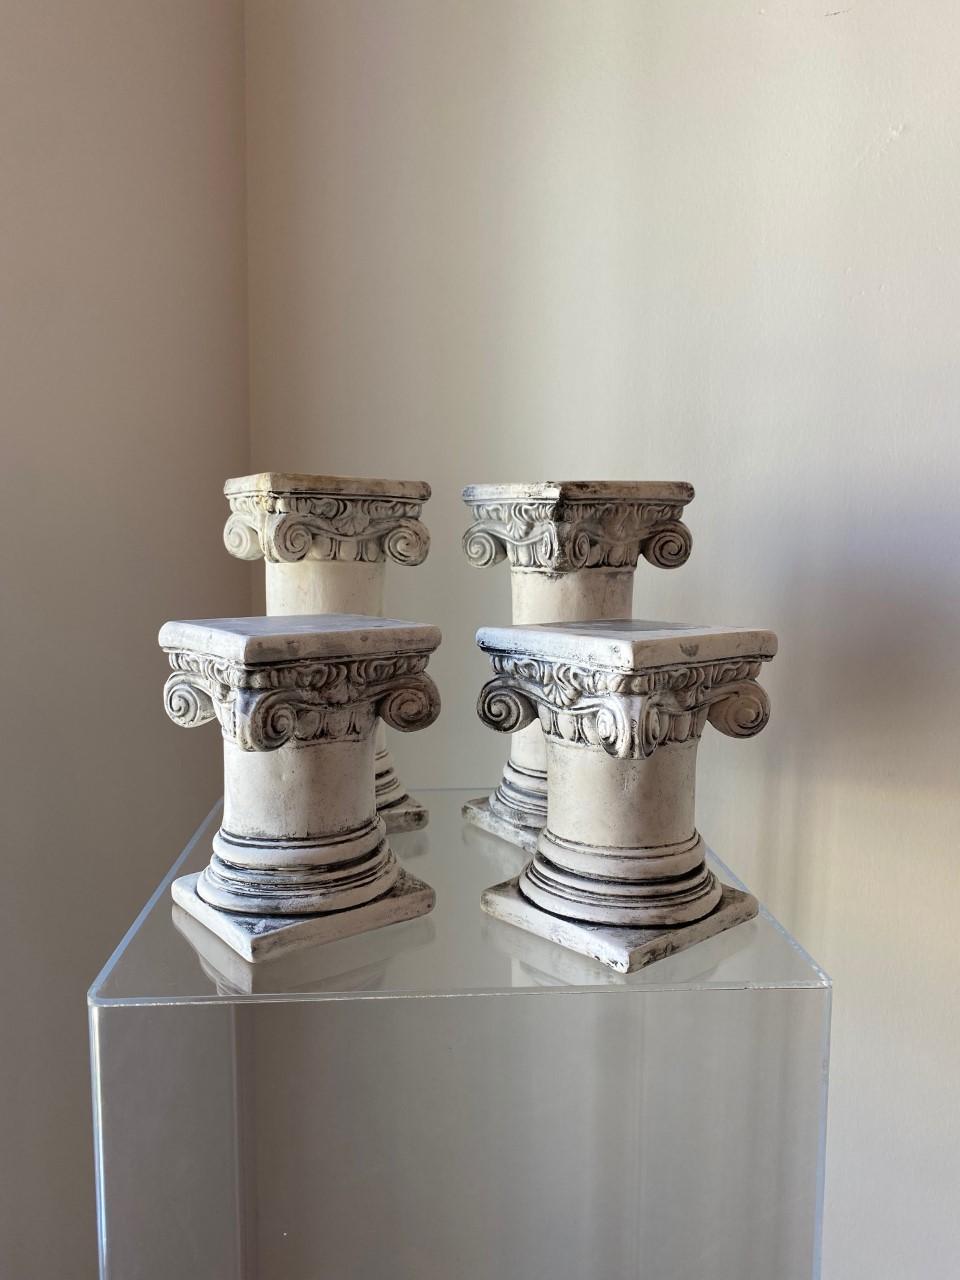 Unique and interesting set of 4 decorative plaster greek columns. These fun pieces have a variety of uses that add to their striking style and beauty. Modeled as greek composite columns, these pieces add a Classic yet edgy style to your décor. They